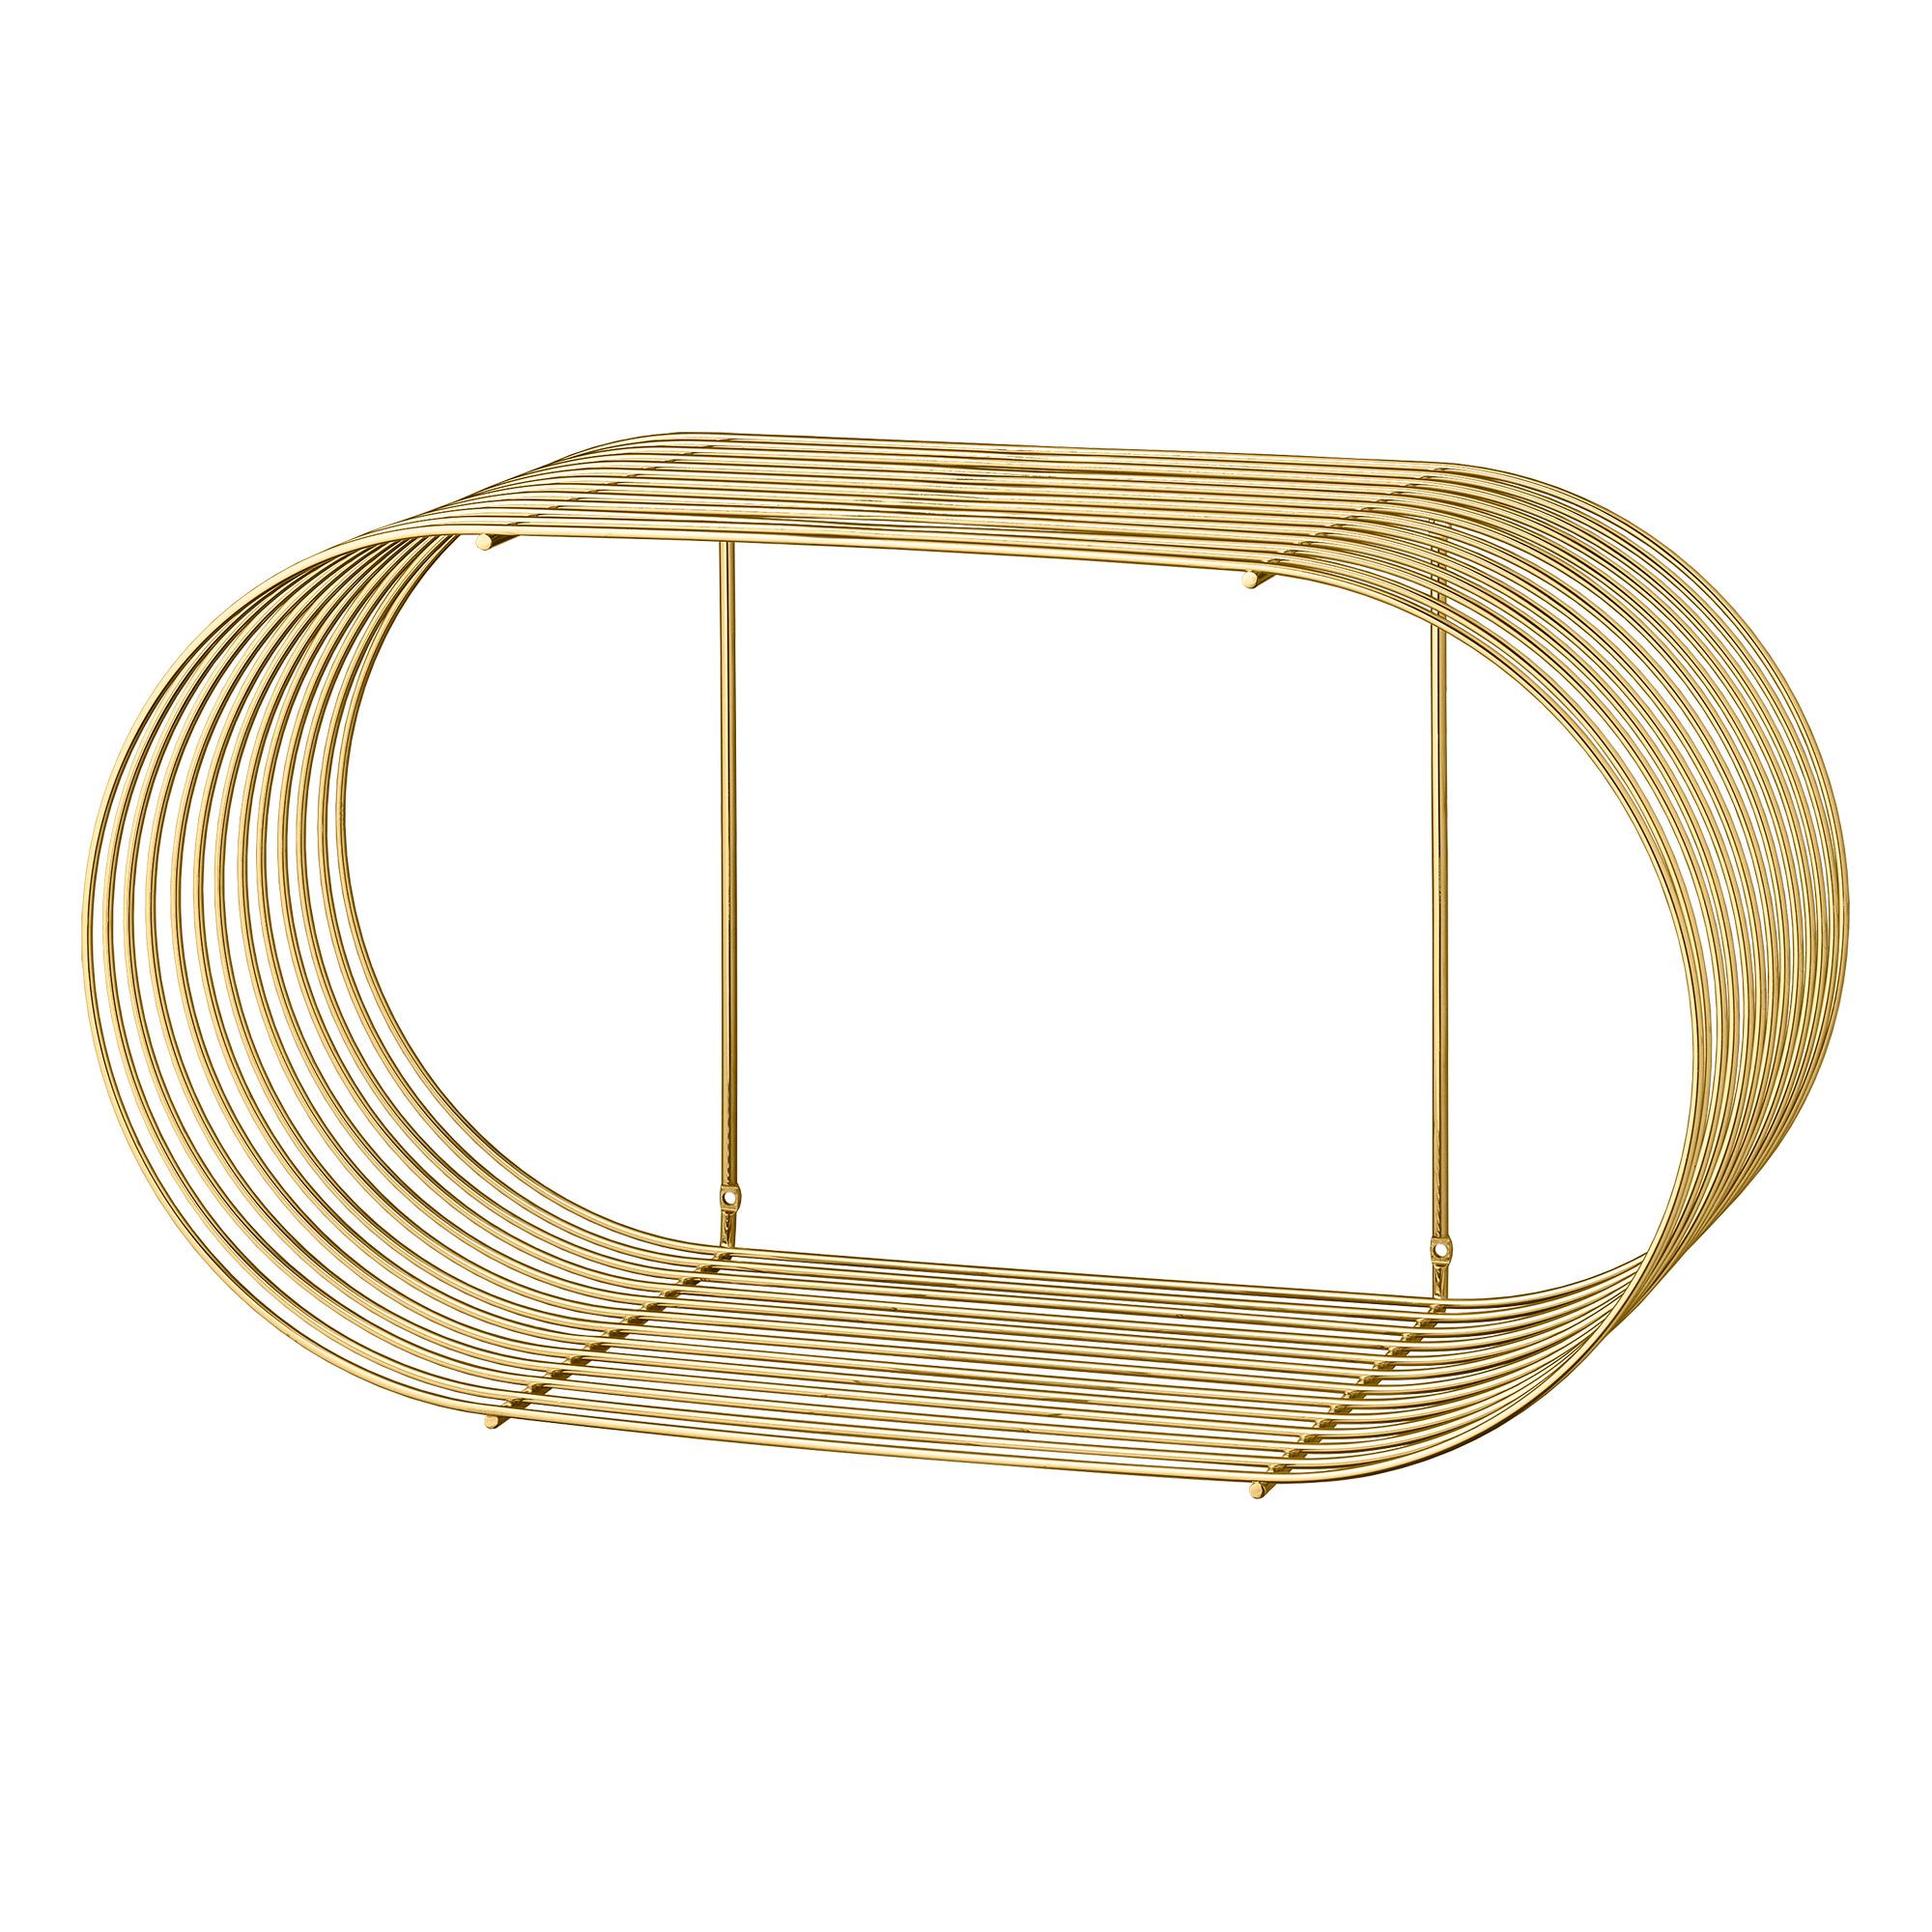 Large gold contemporary shelf
Dimensions: L 61.4 x W 25.3 x H 33 cm 
Materials: Steel.
Also available in Silver and Black.


It is not always easy to determine what makes a design become an icon, but it seems the Curva shelf has accomplished